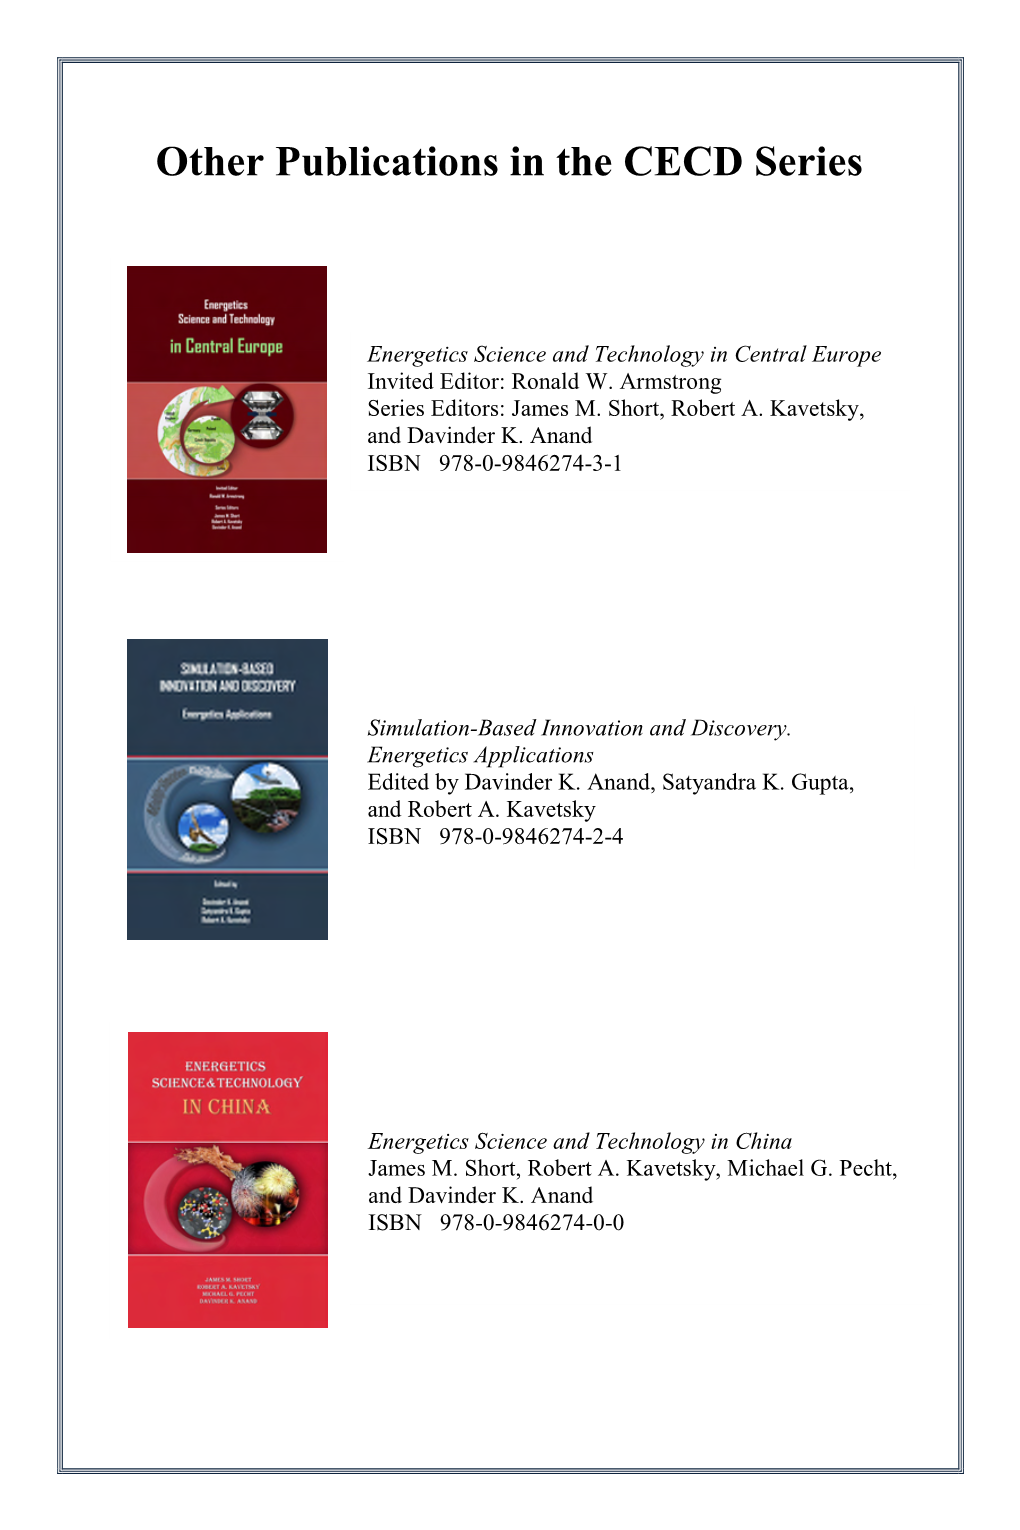 Other Publications in the CECD Series